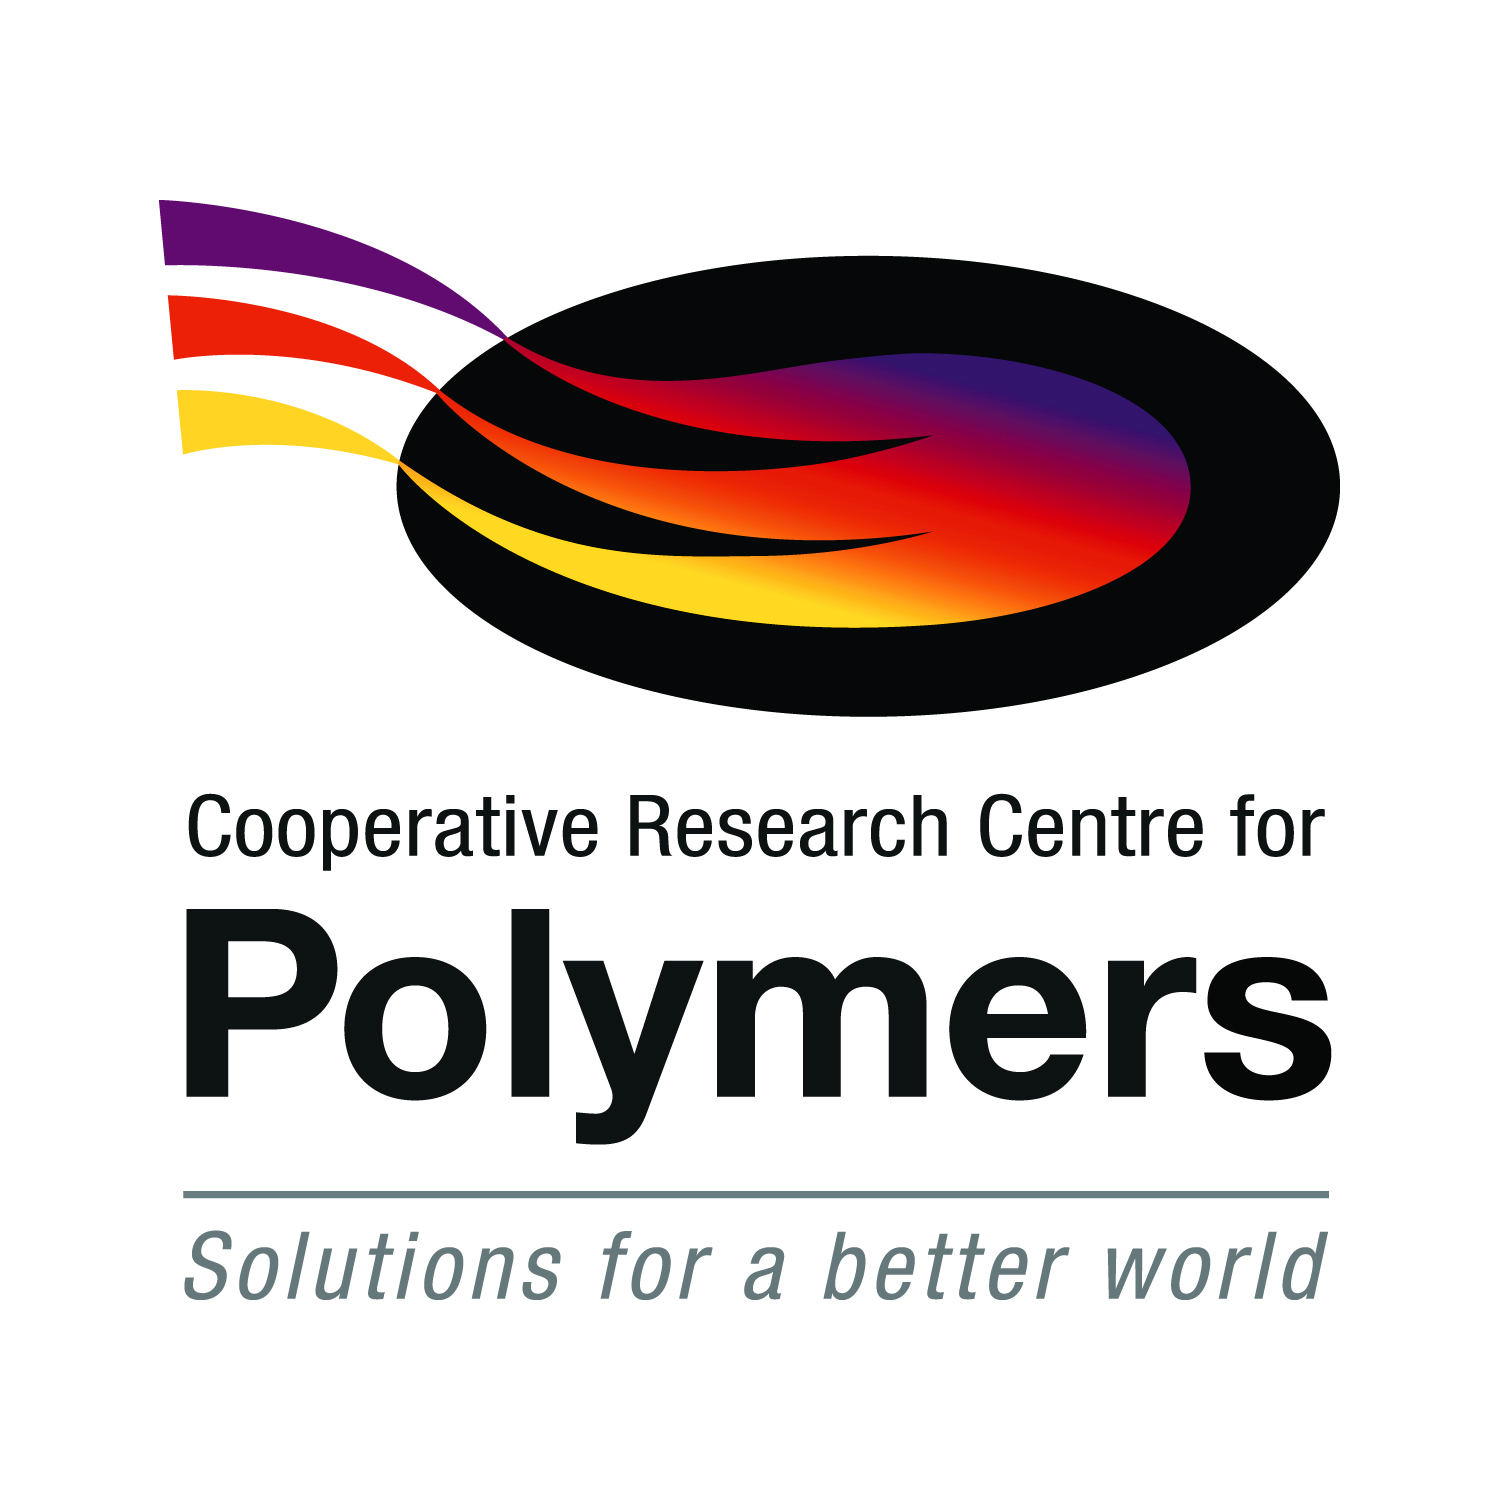 CRC for Polymers logo